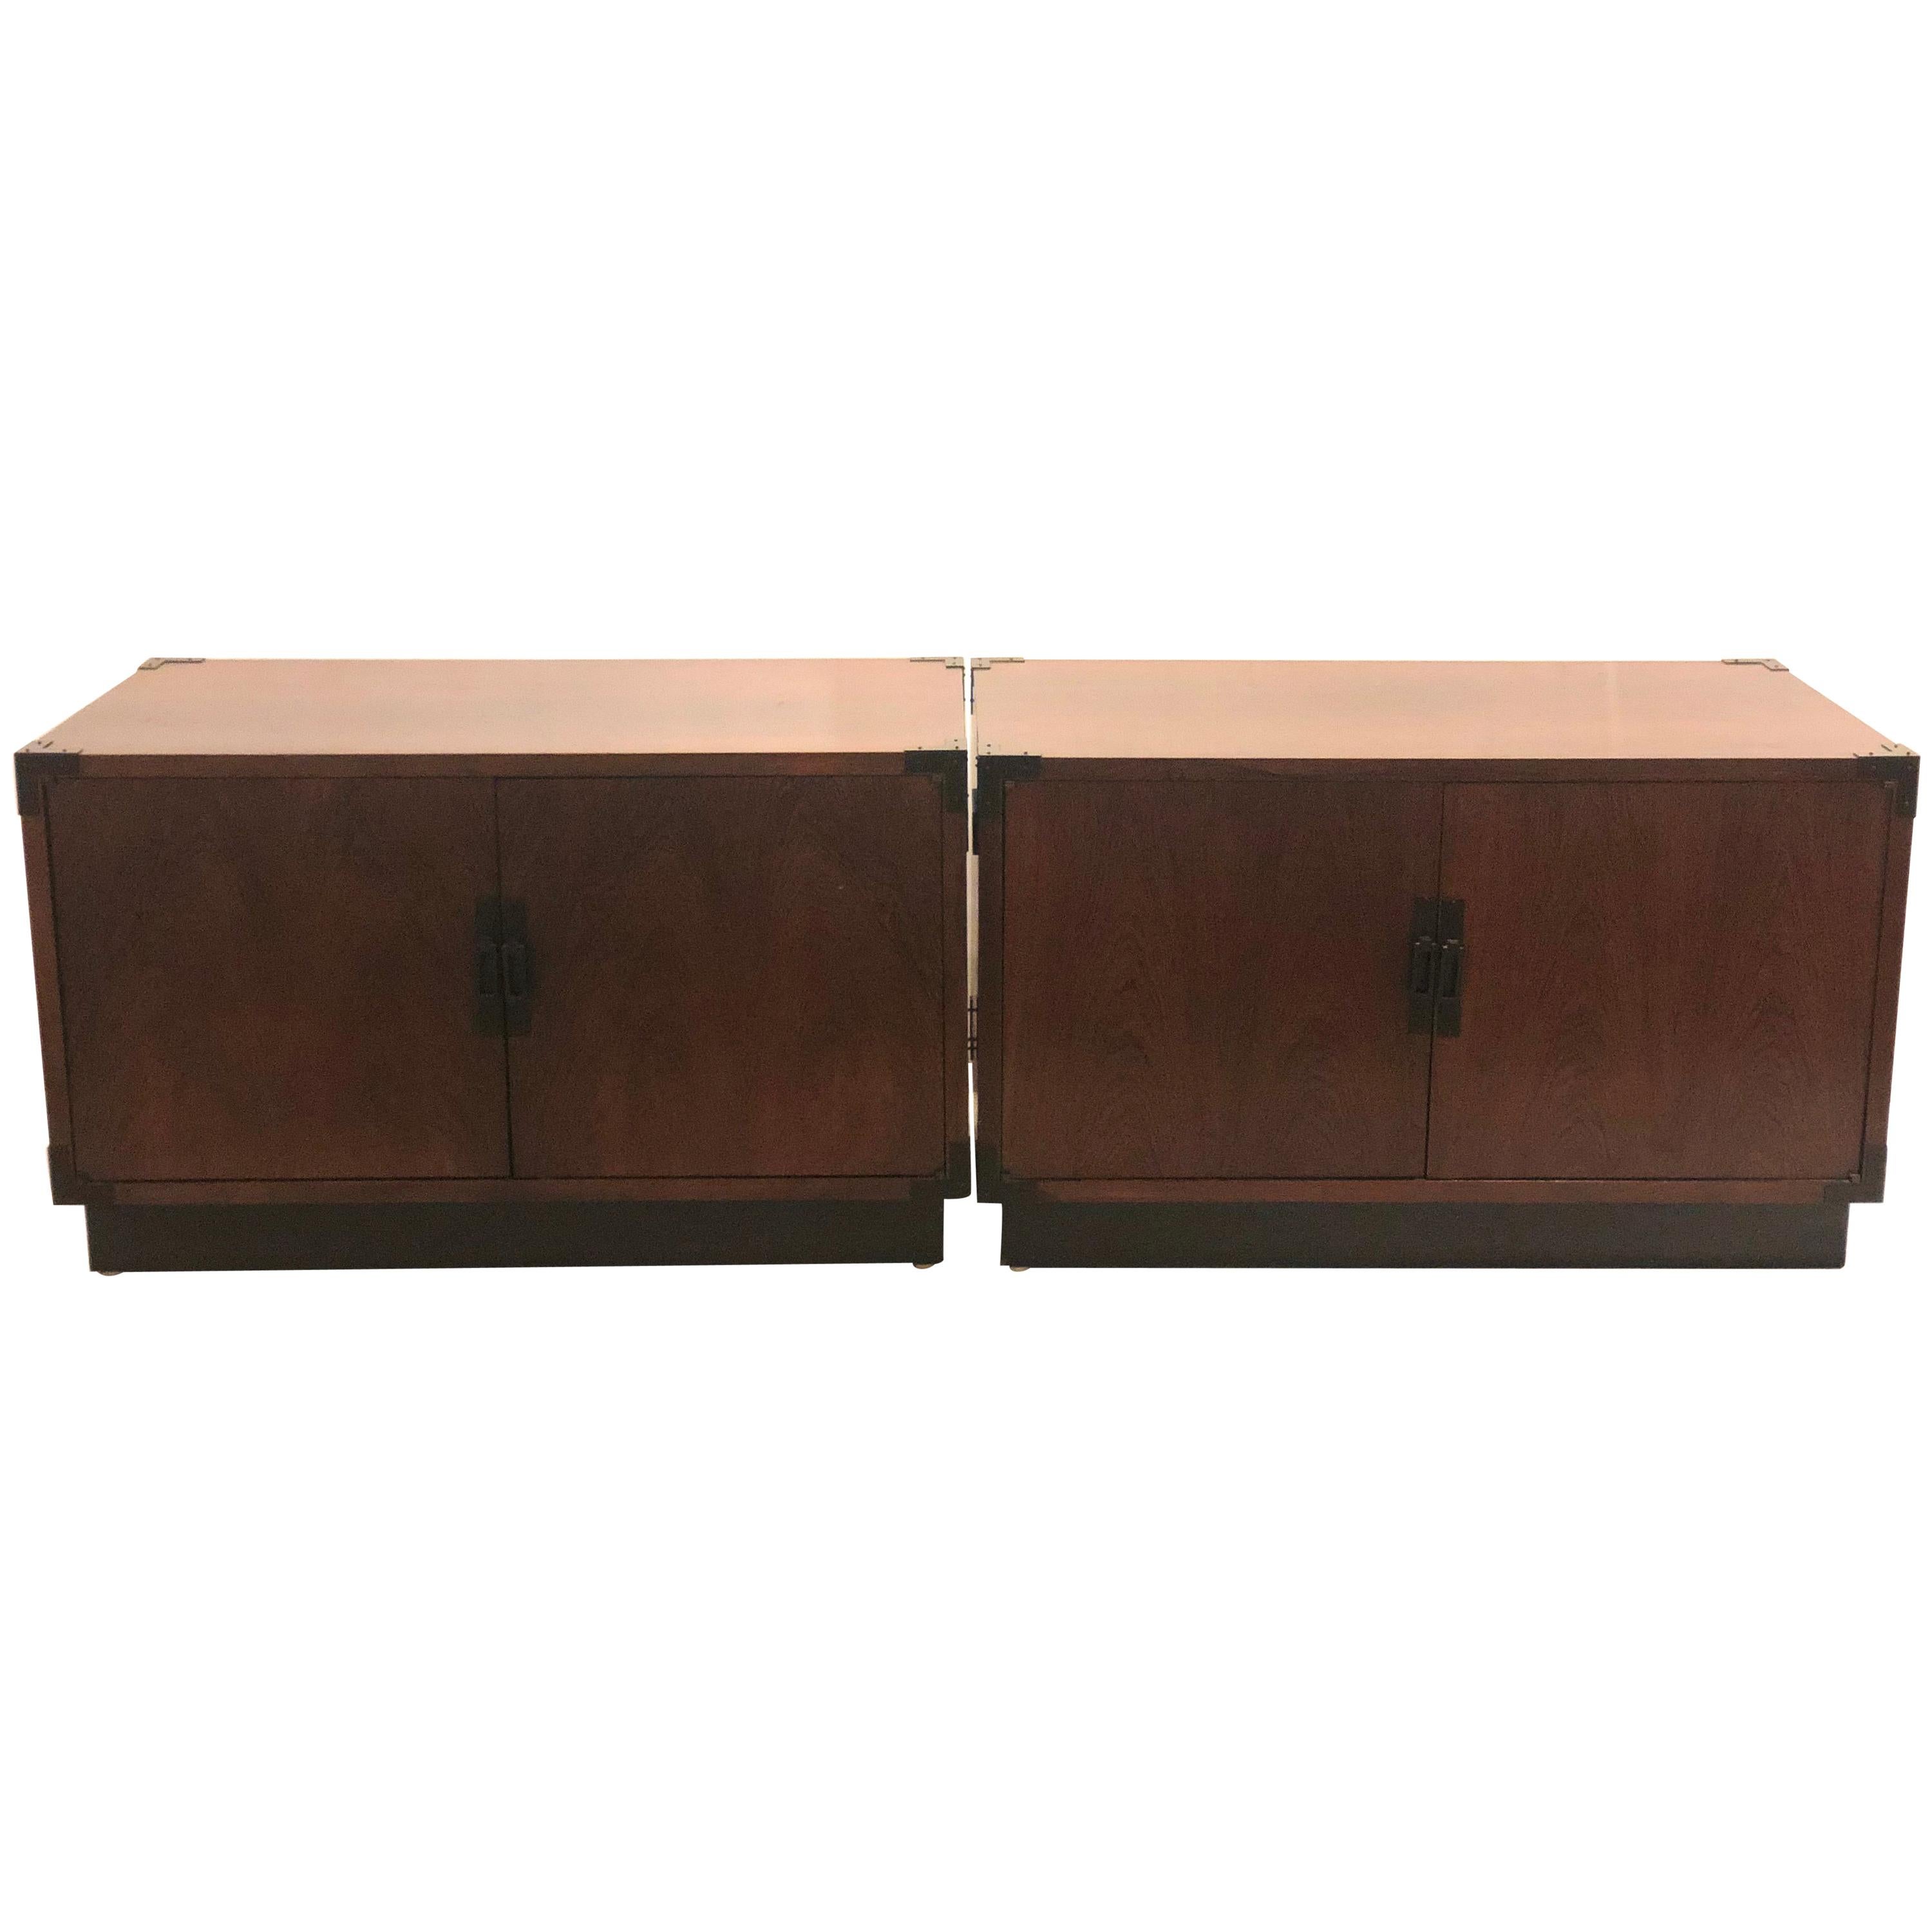 Pair of Danish Modern Low Rosewood Cabinets with Side Handles